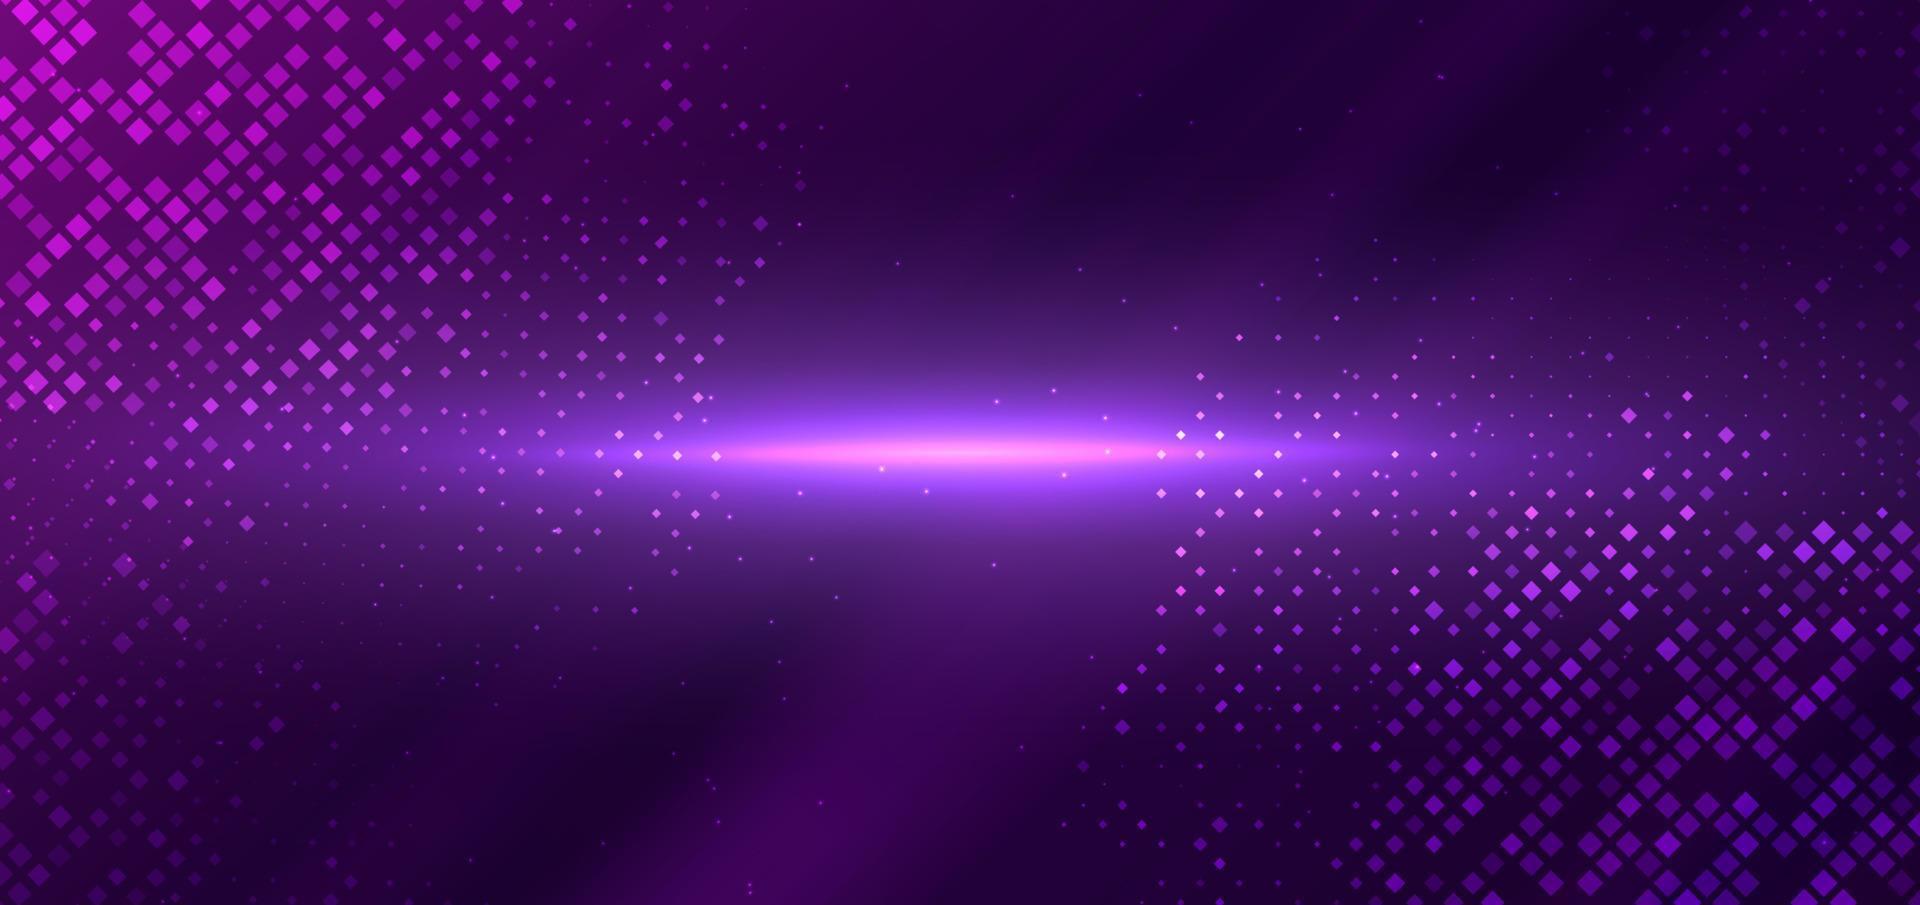 Abstract technology futuristic digital square pattern with lighting glowing particles square elements on dark purple background. vector